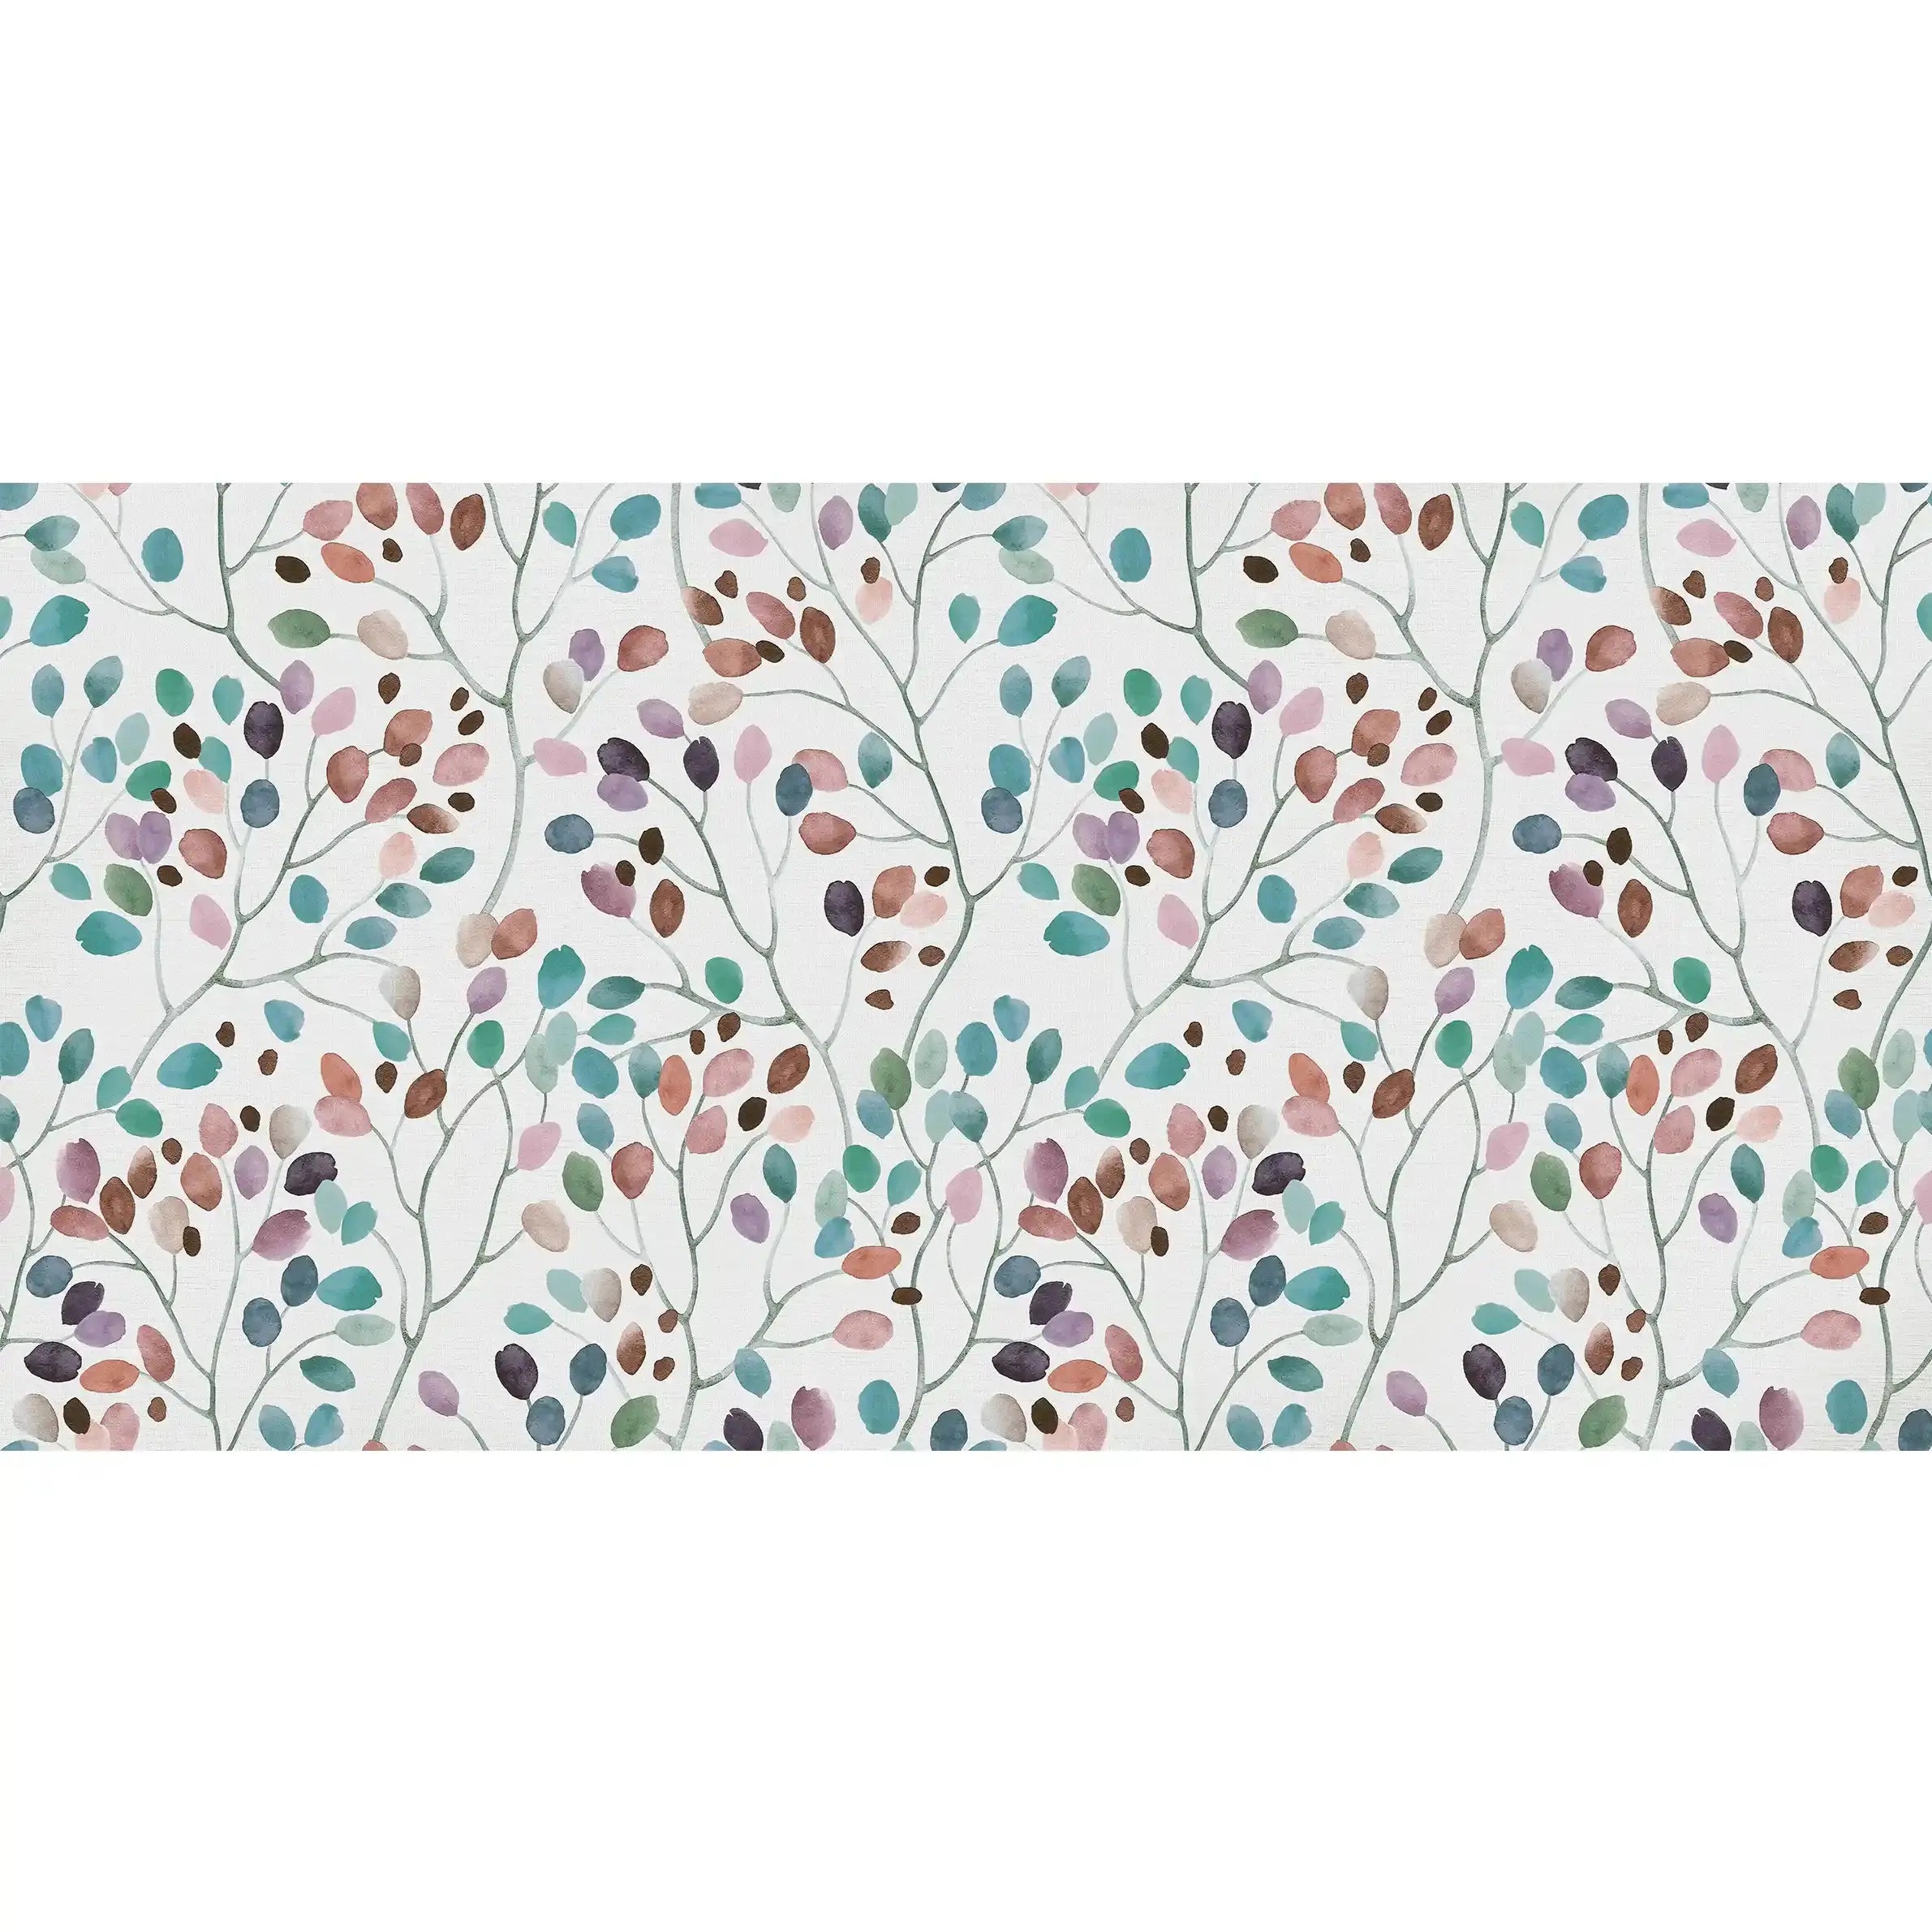 3063-D / Tropical Floral Peel and Stick Wallpaper - Colorful Woodland Branch, Decorative for Accent Wall, Removable and Easy to Install - Artevella